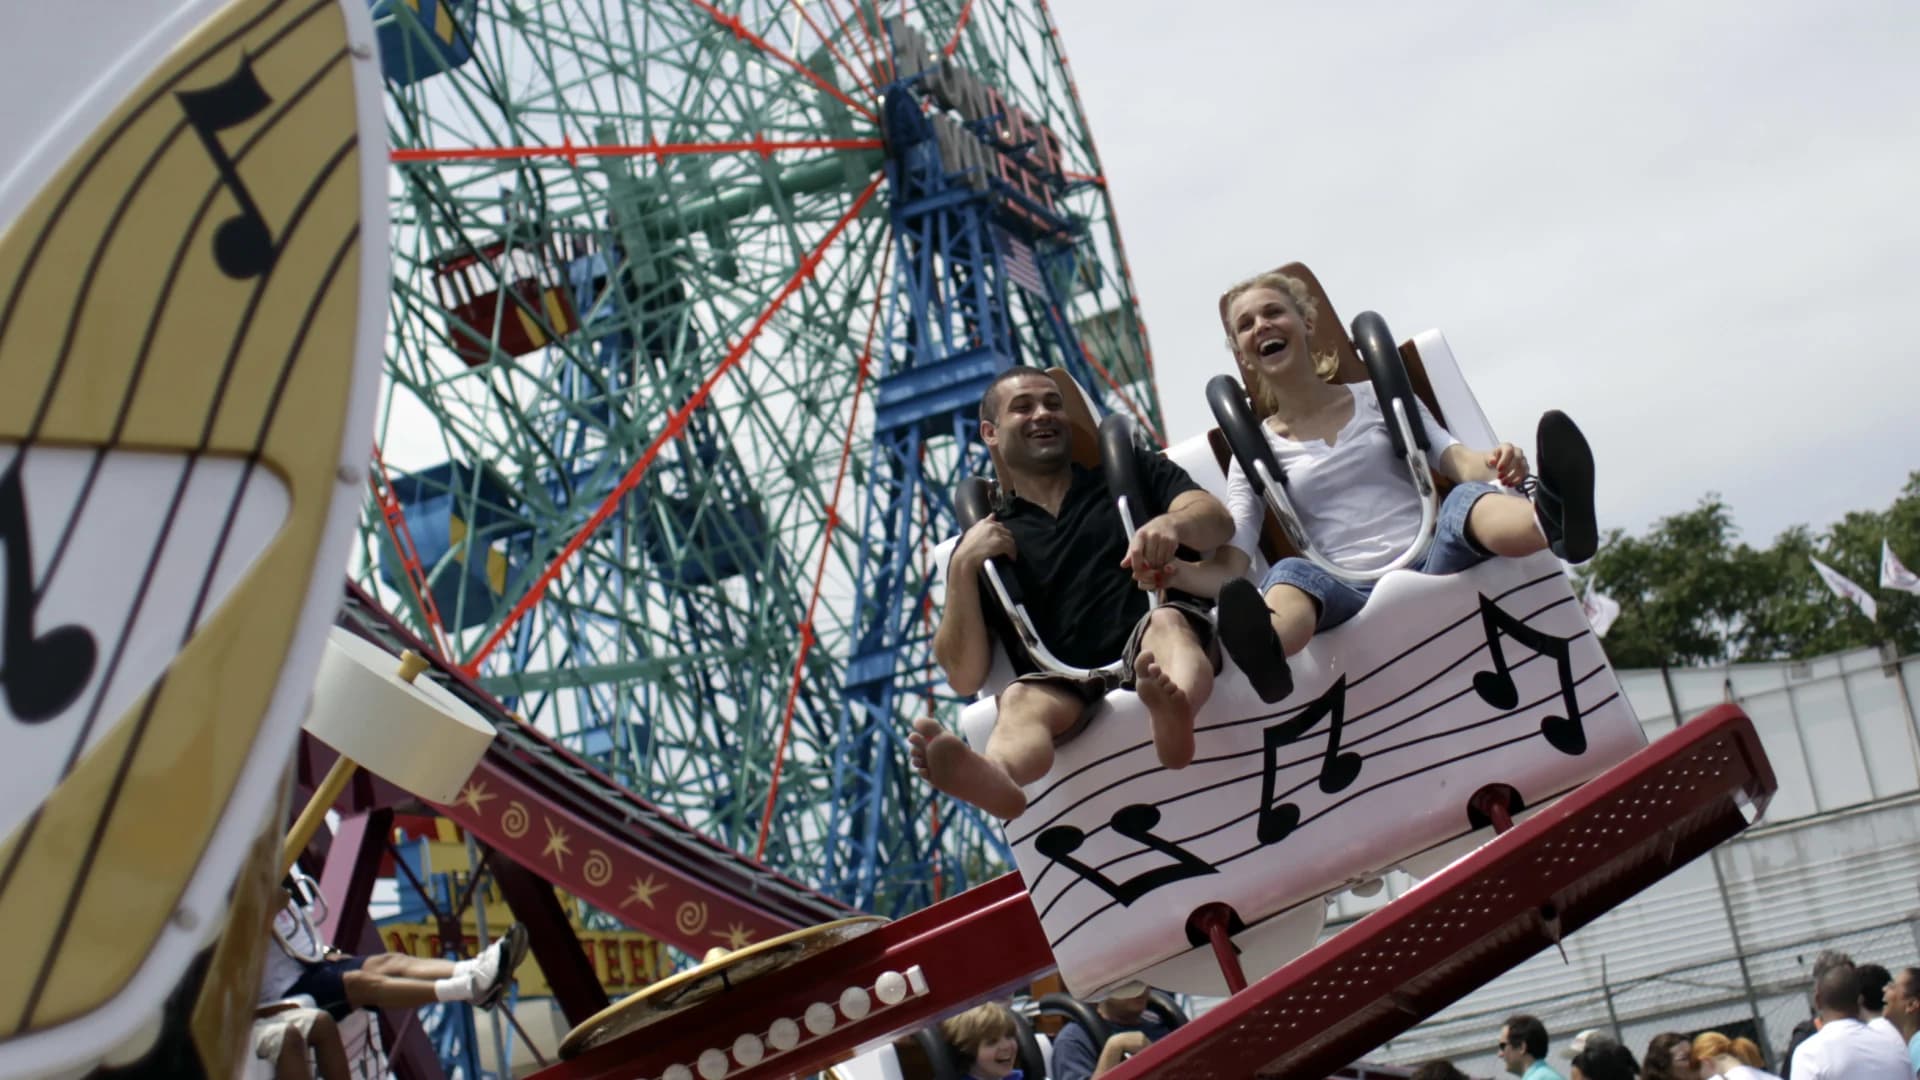 Luna Park to debut two new rides this summer